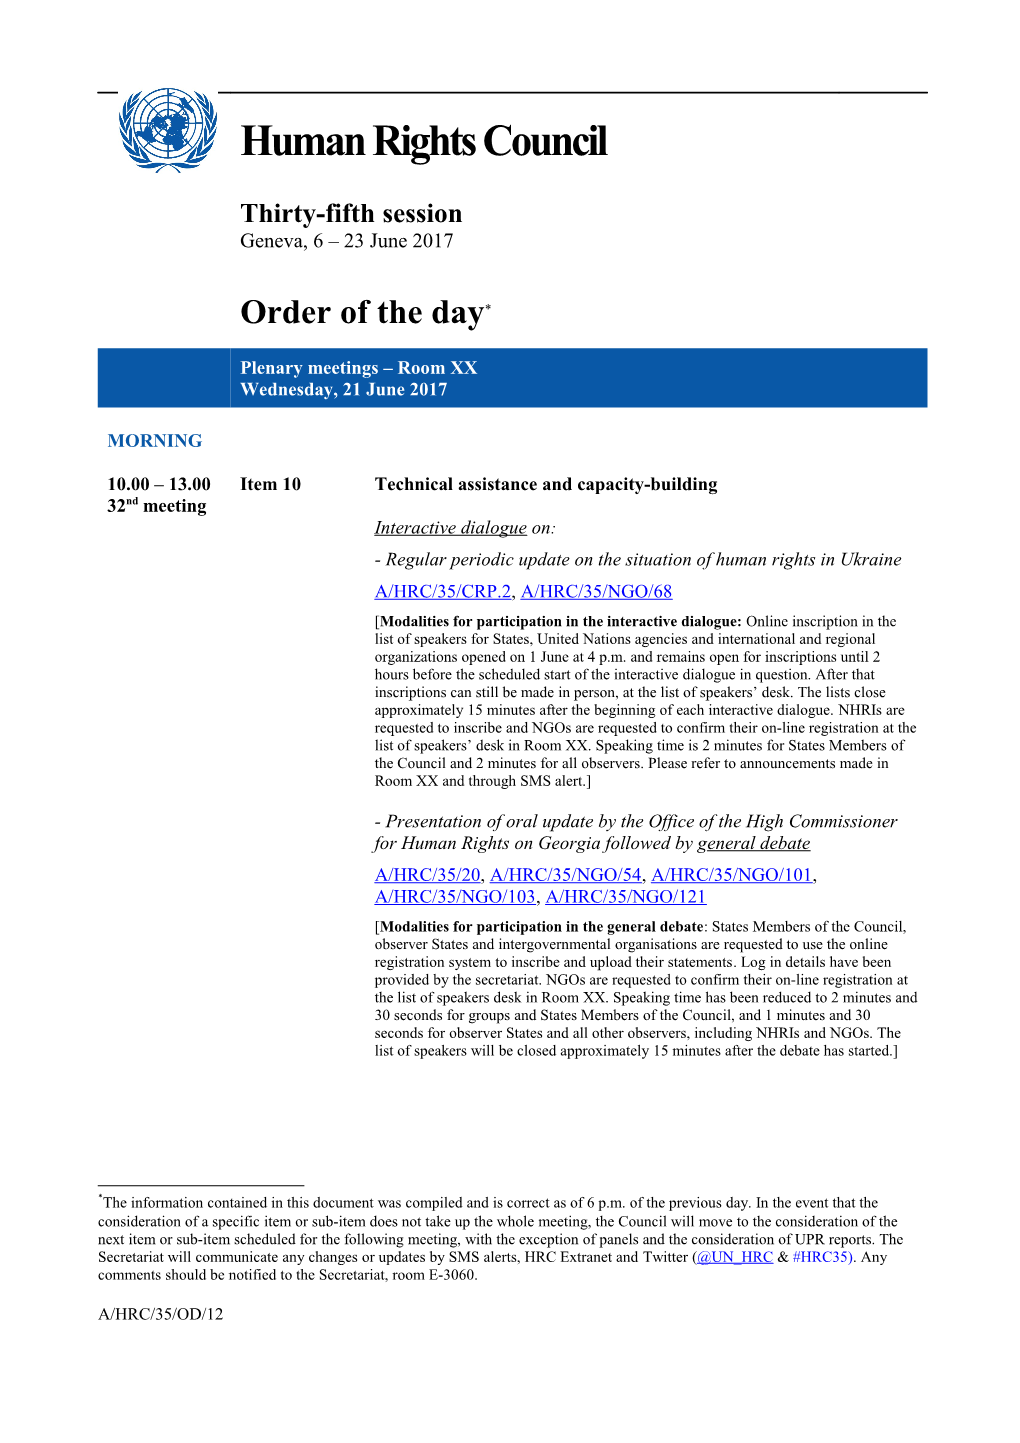 Order of the Day, Wednesday 21 June 2017